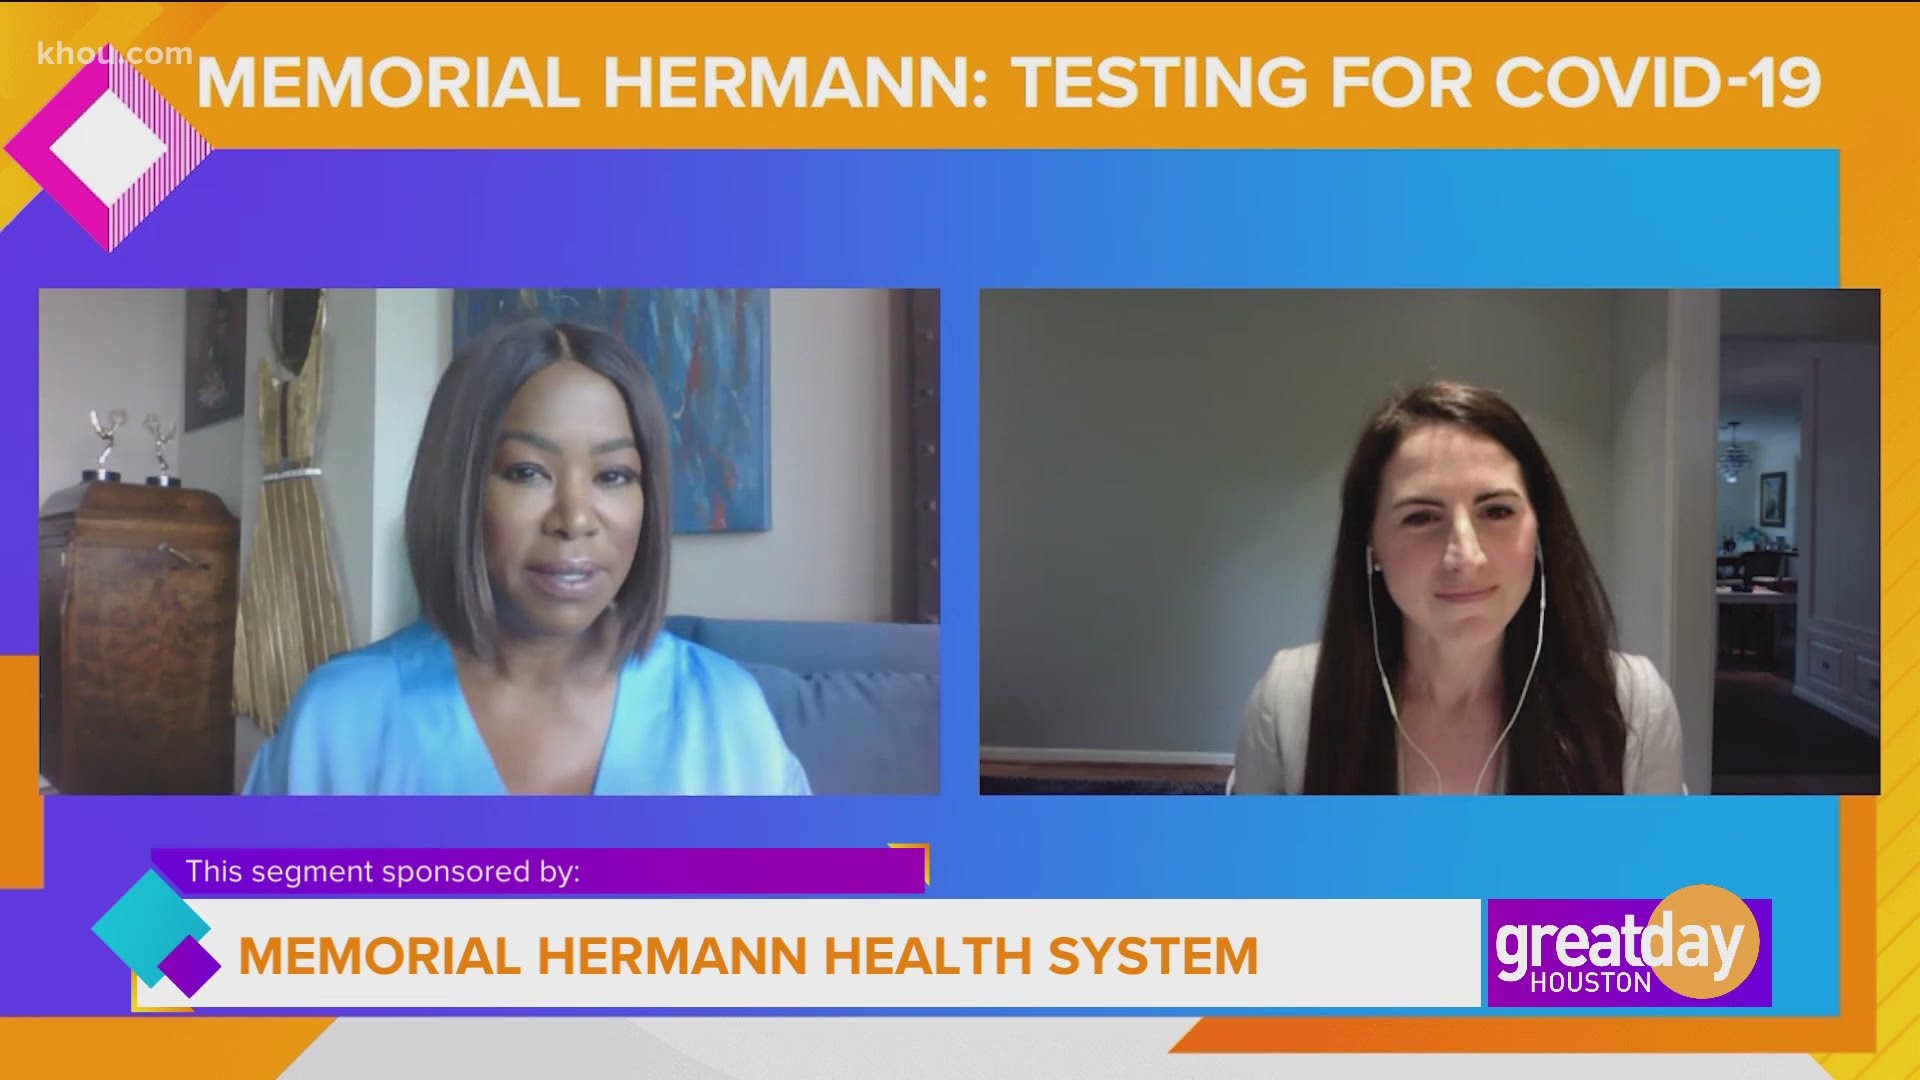 Dr. Annamaria Davidson with Memorial Hermann Cypress Hospital explains the type of tests for COVID-19 and the importance of getting tested.